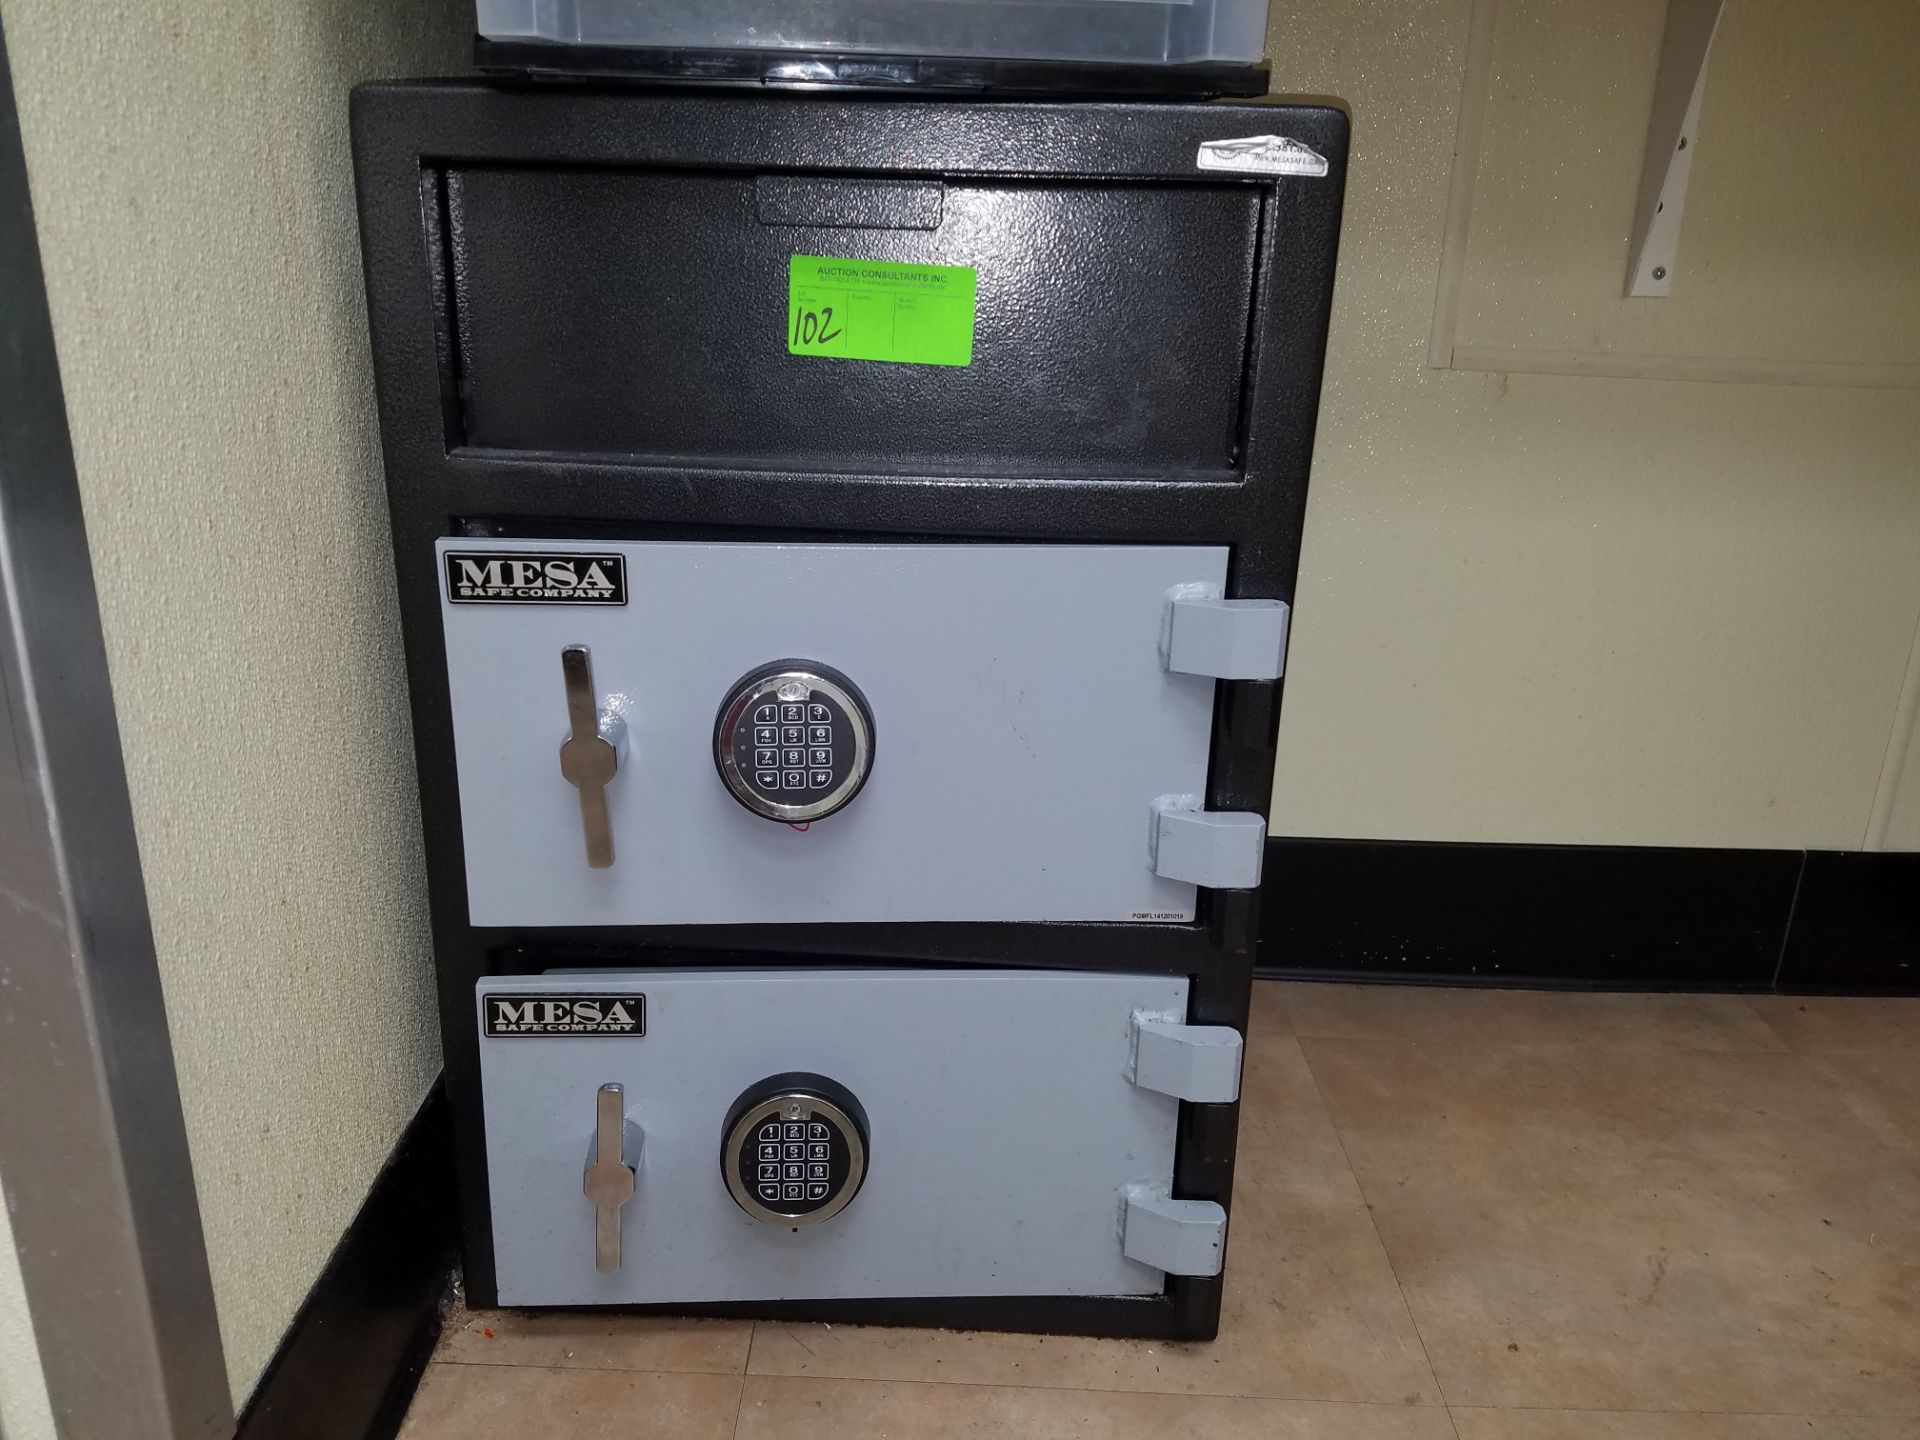 Mesa electronic lock, double door safe with cash drawer, have combination